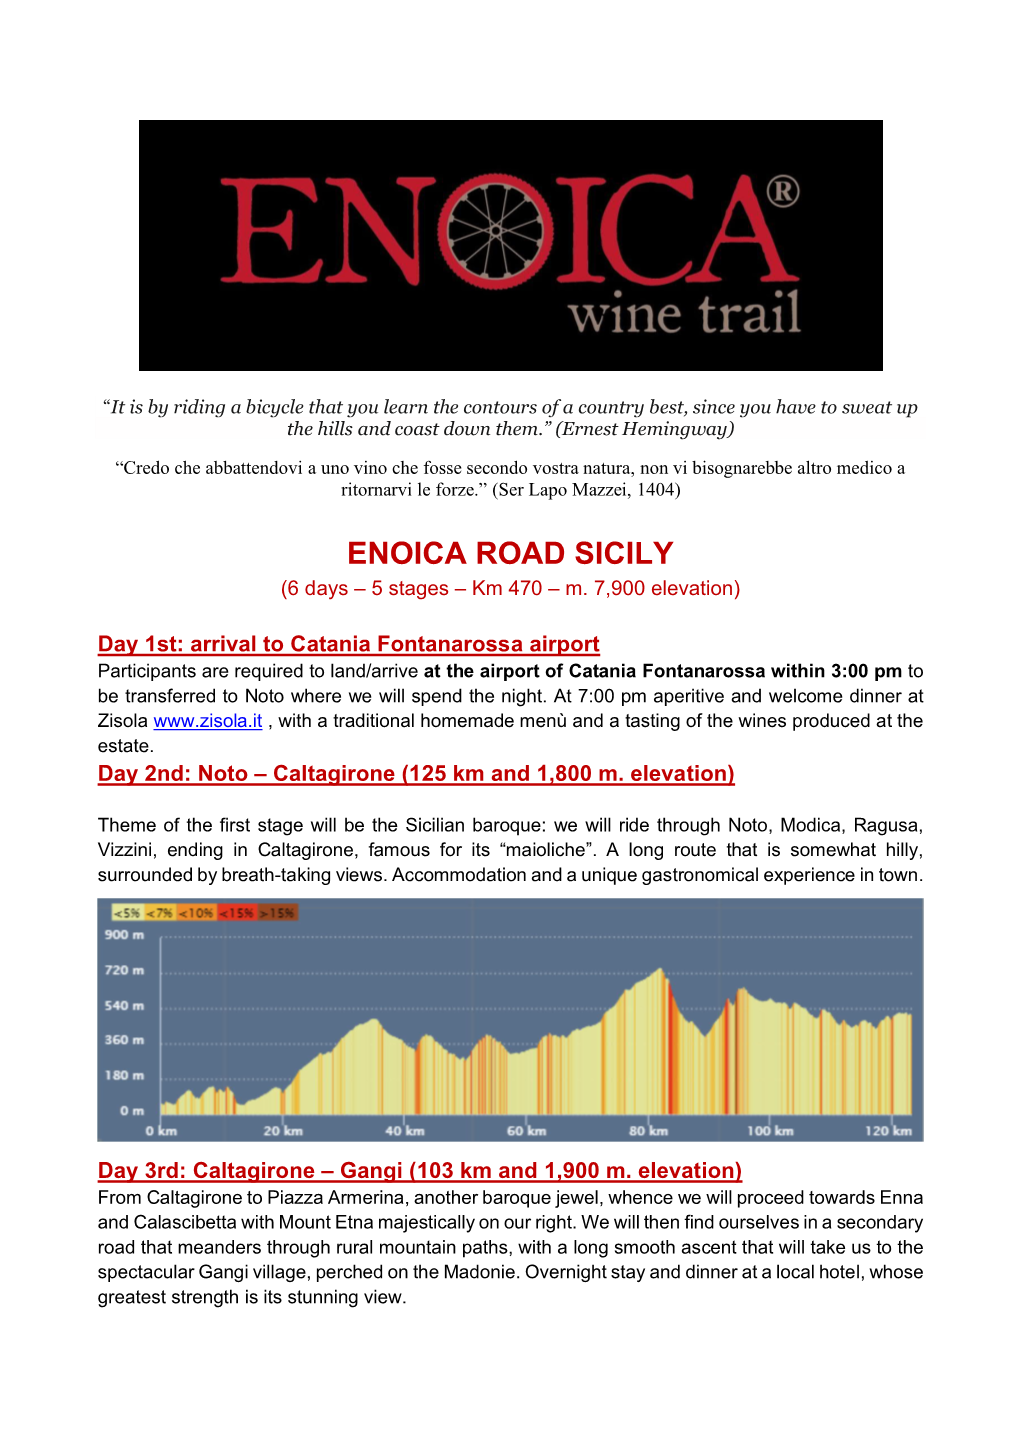 ENOICA ROAD SICILY (6 Days – 5 Stages – Km 470 – M